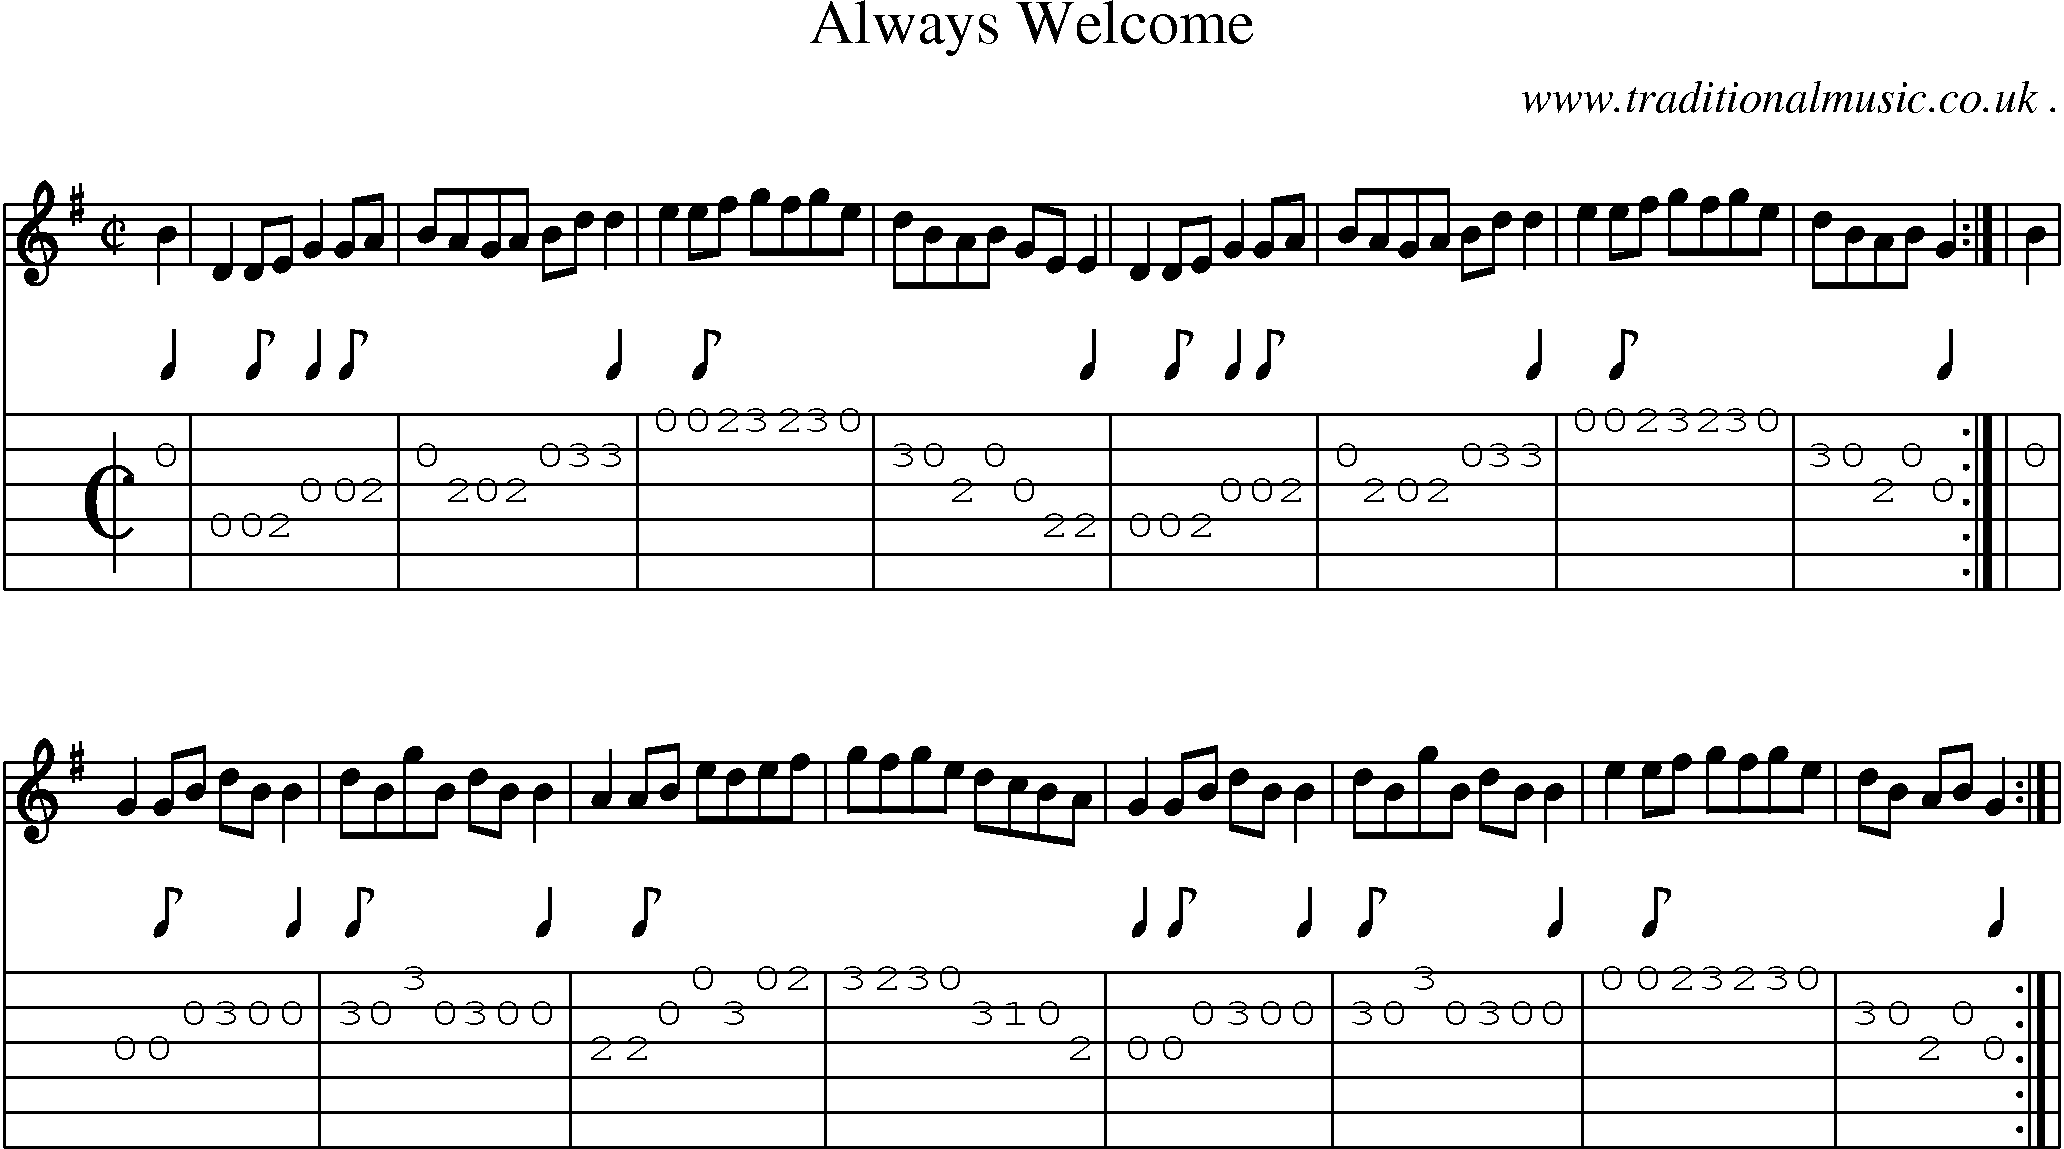 Sheet-music  score, Chords and Guitar Tabs for Always Welcome